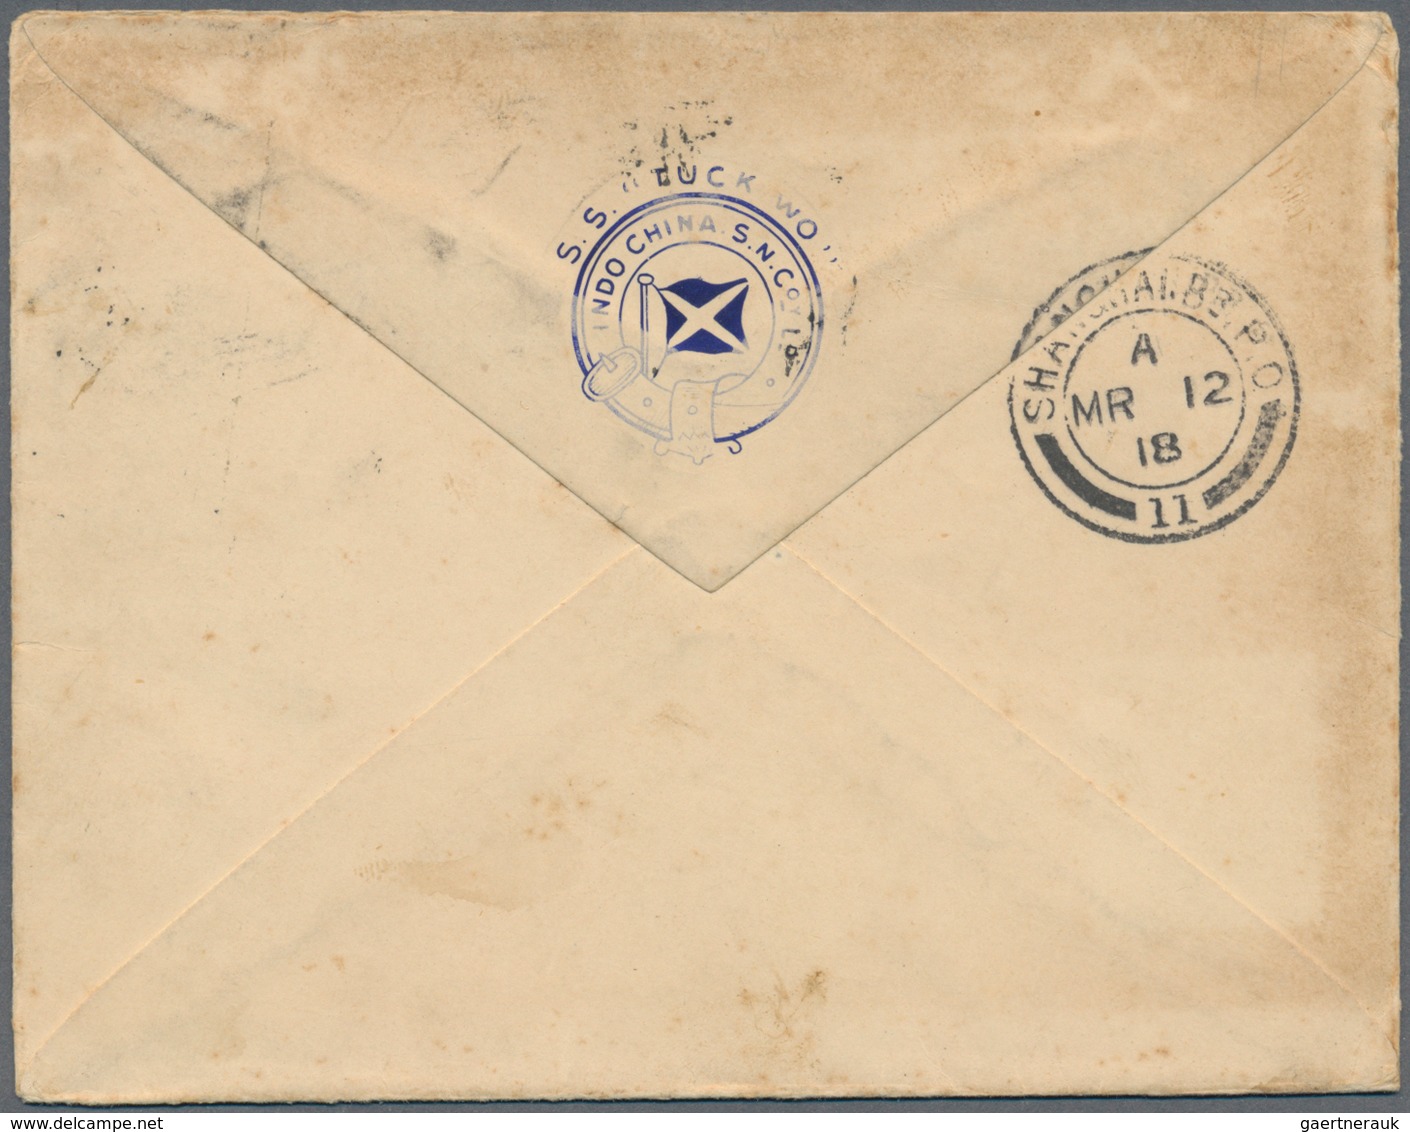 08593 Hongkong - Britische Post In China: 1918. Envelope (a Few Spots) Written From 'S.S. "Tuck Wo" Near H - Lettres & Documents